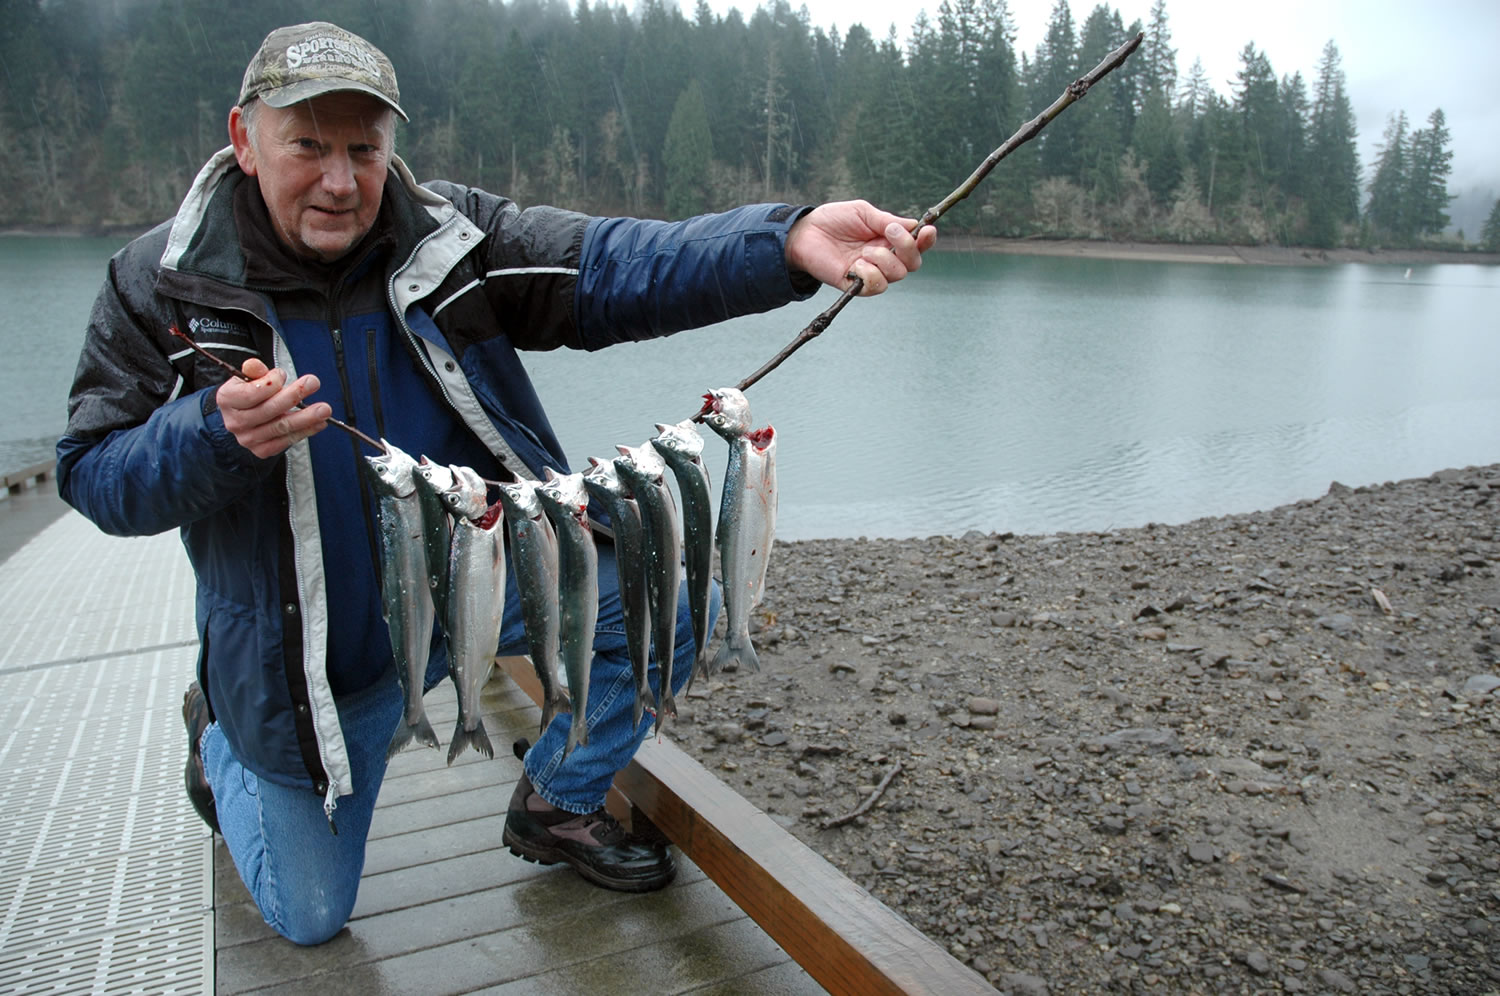 State officials increased the kokanee limit to 10 per day in August and want to make the change permanent.